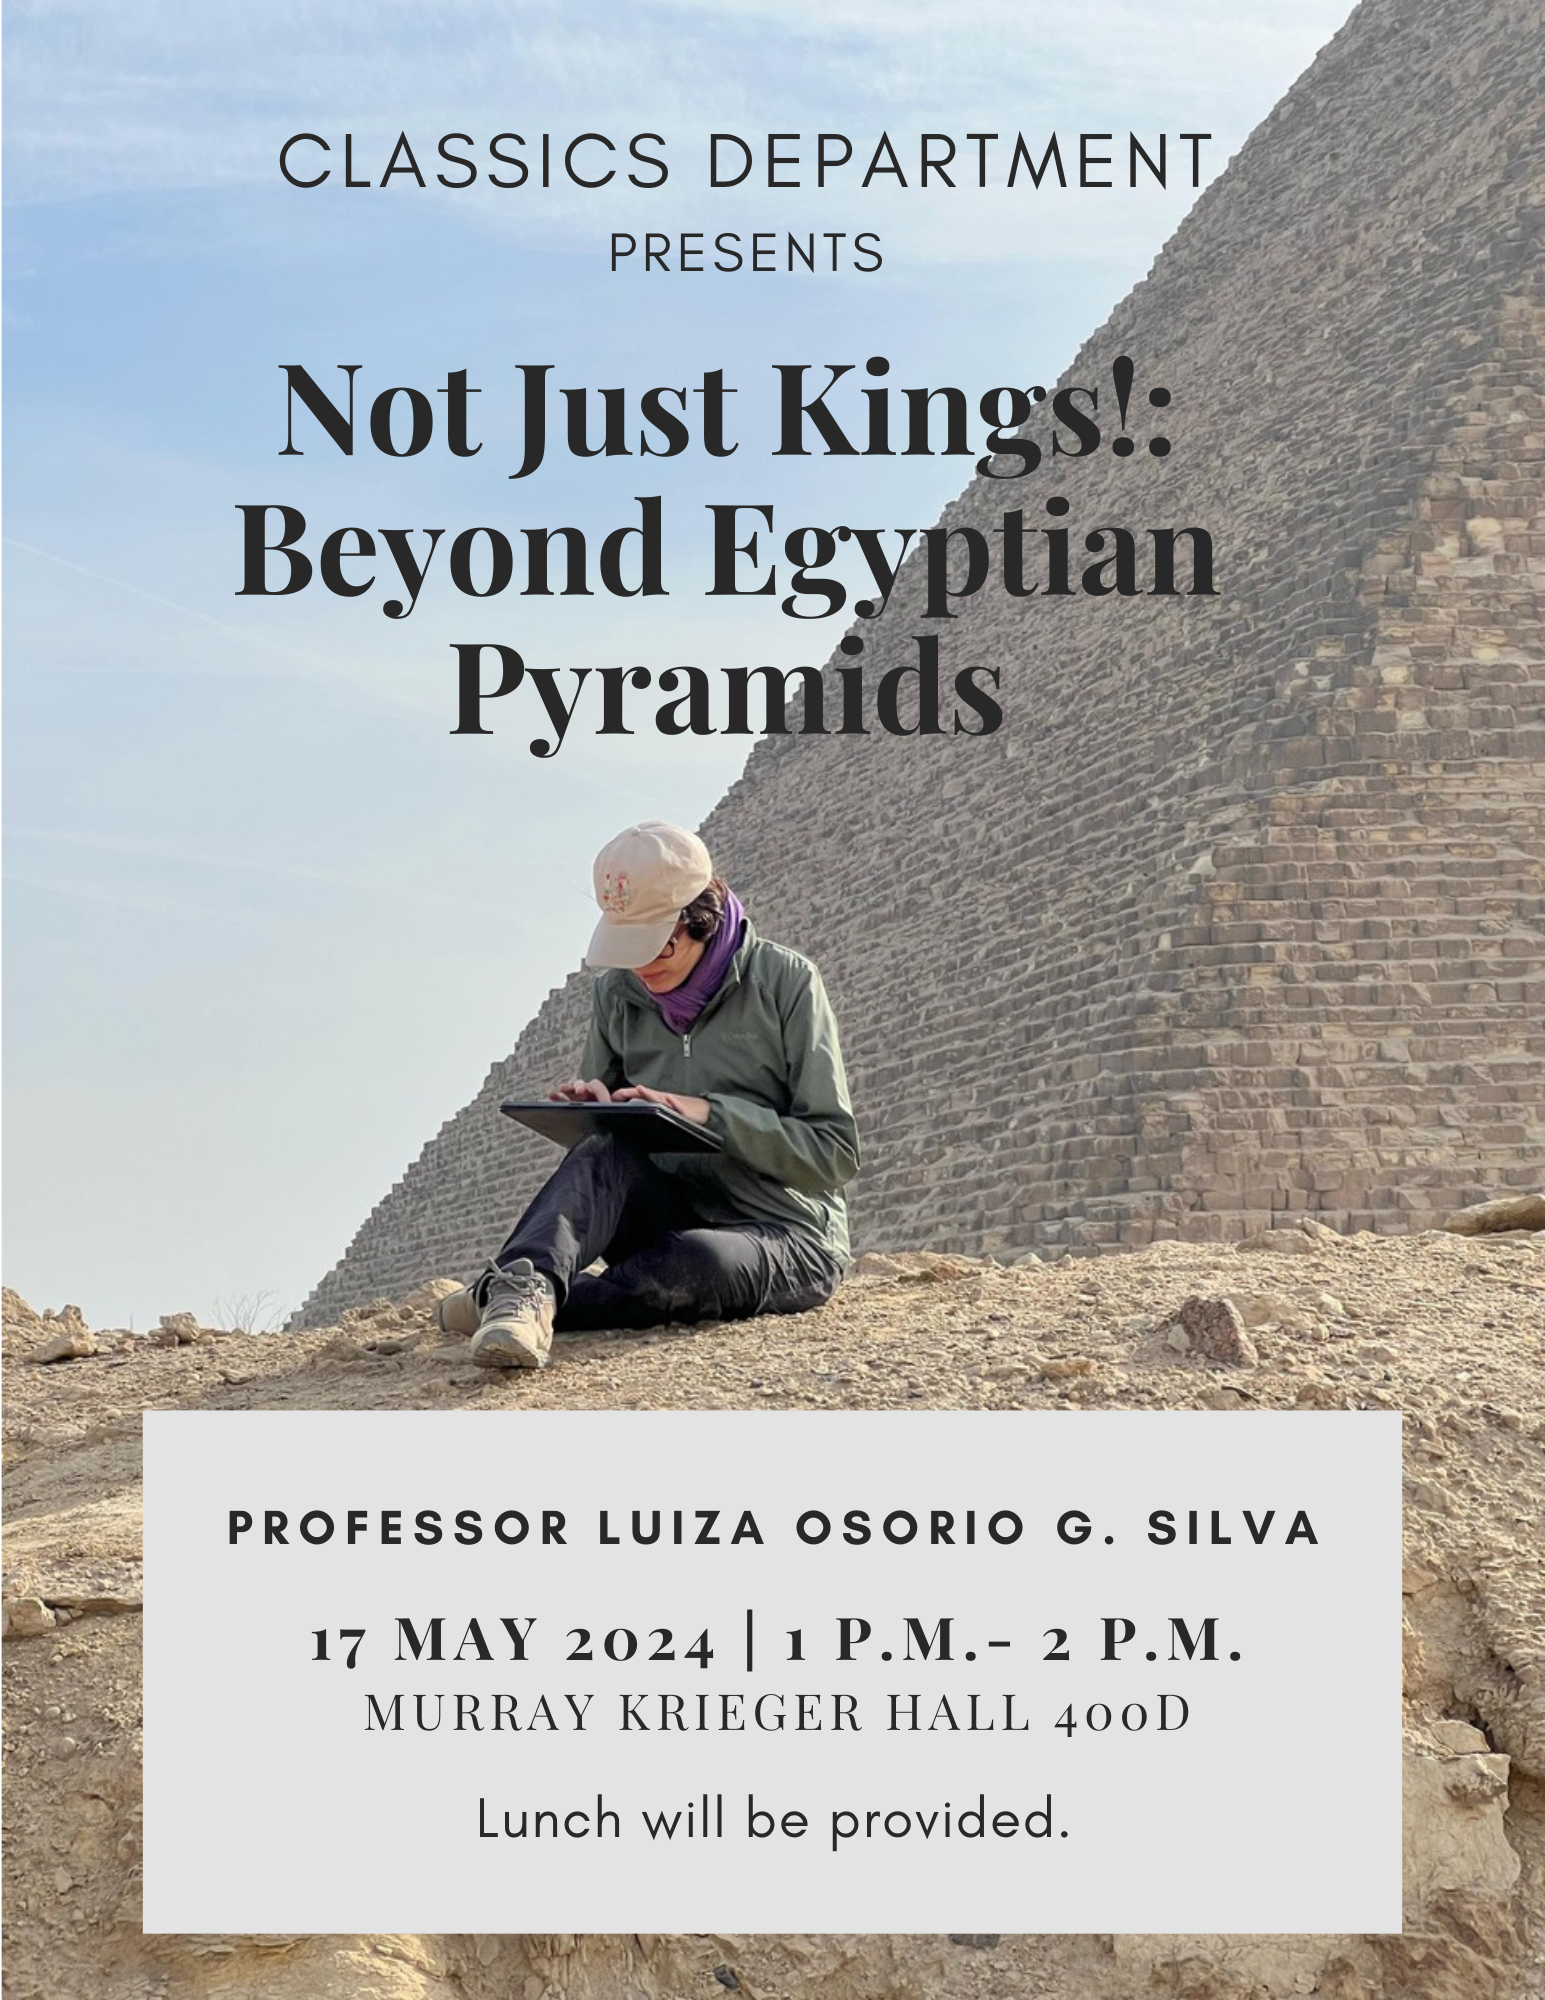 Classics event on May 17 at 1 pm in MKH 400D with Professor Luiza Osorio G. Silva